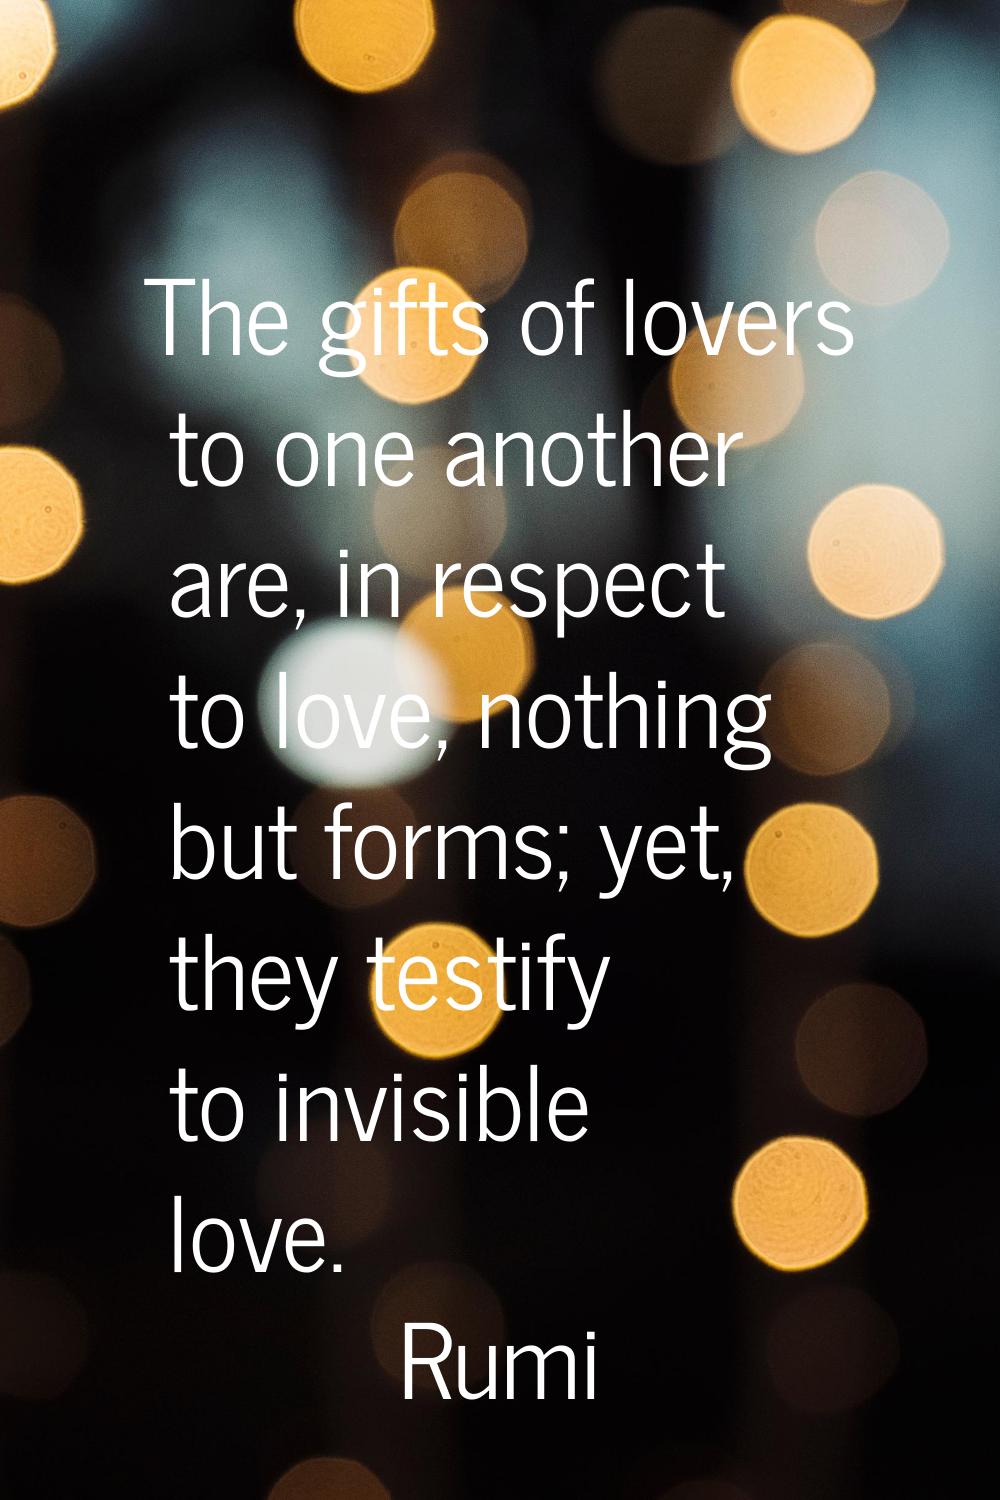 The gifts of lovers to one another are, in respect to love, nothing but forms; yet, they testify to